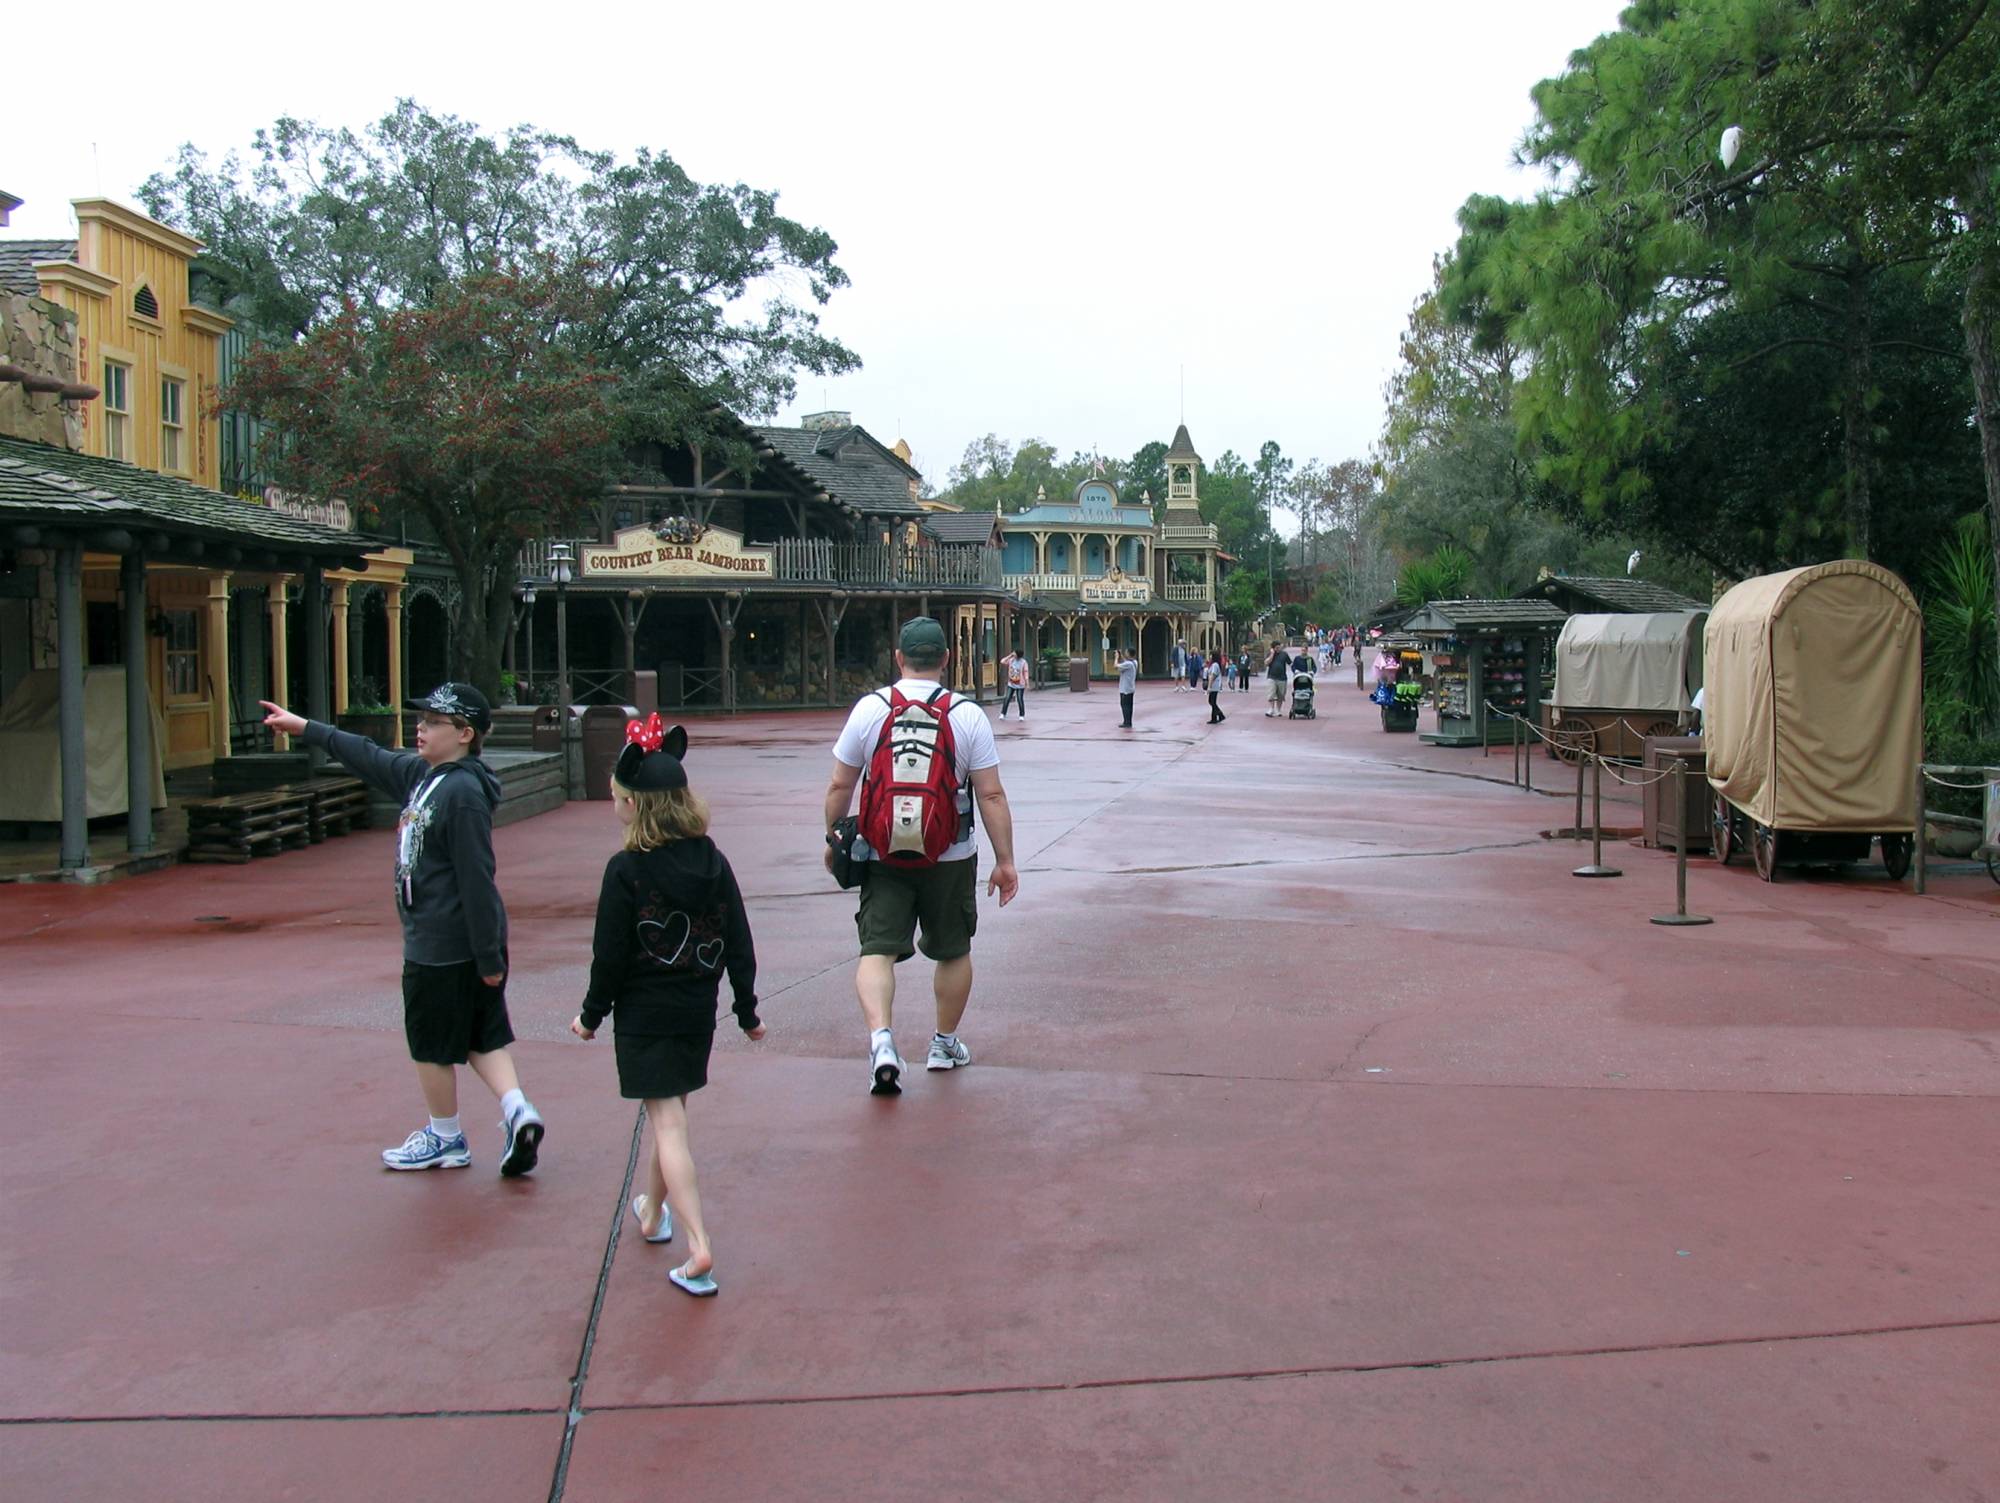 Early morning in Frontierland